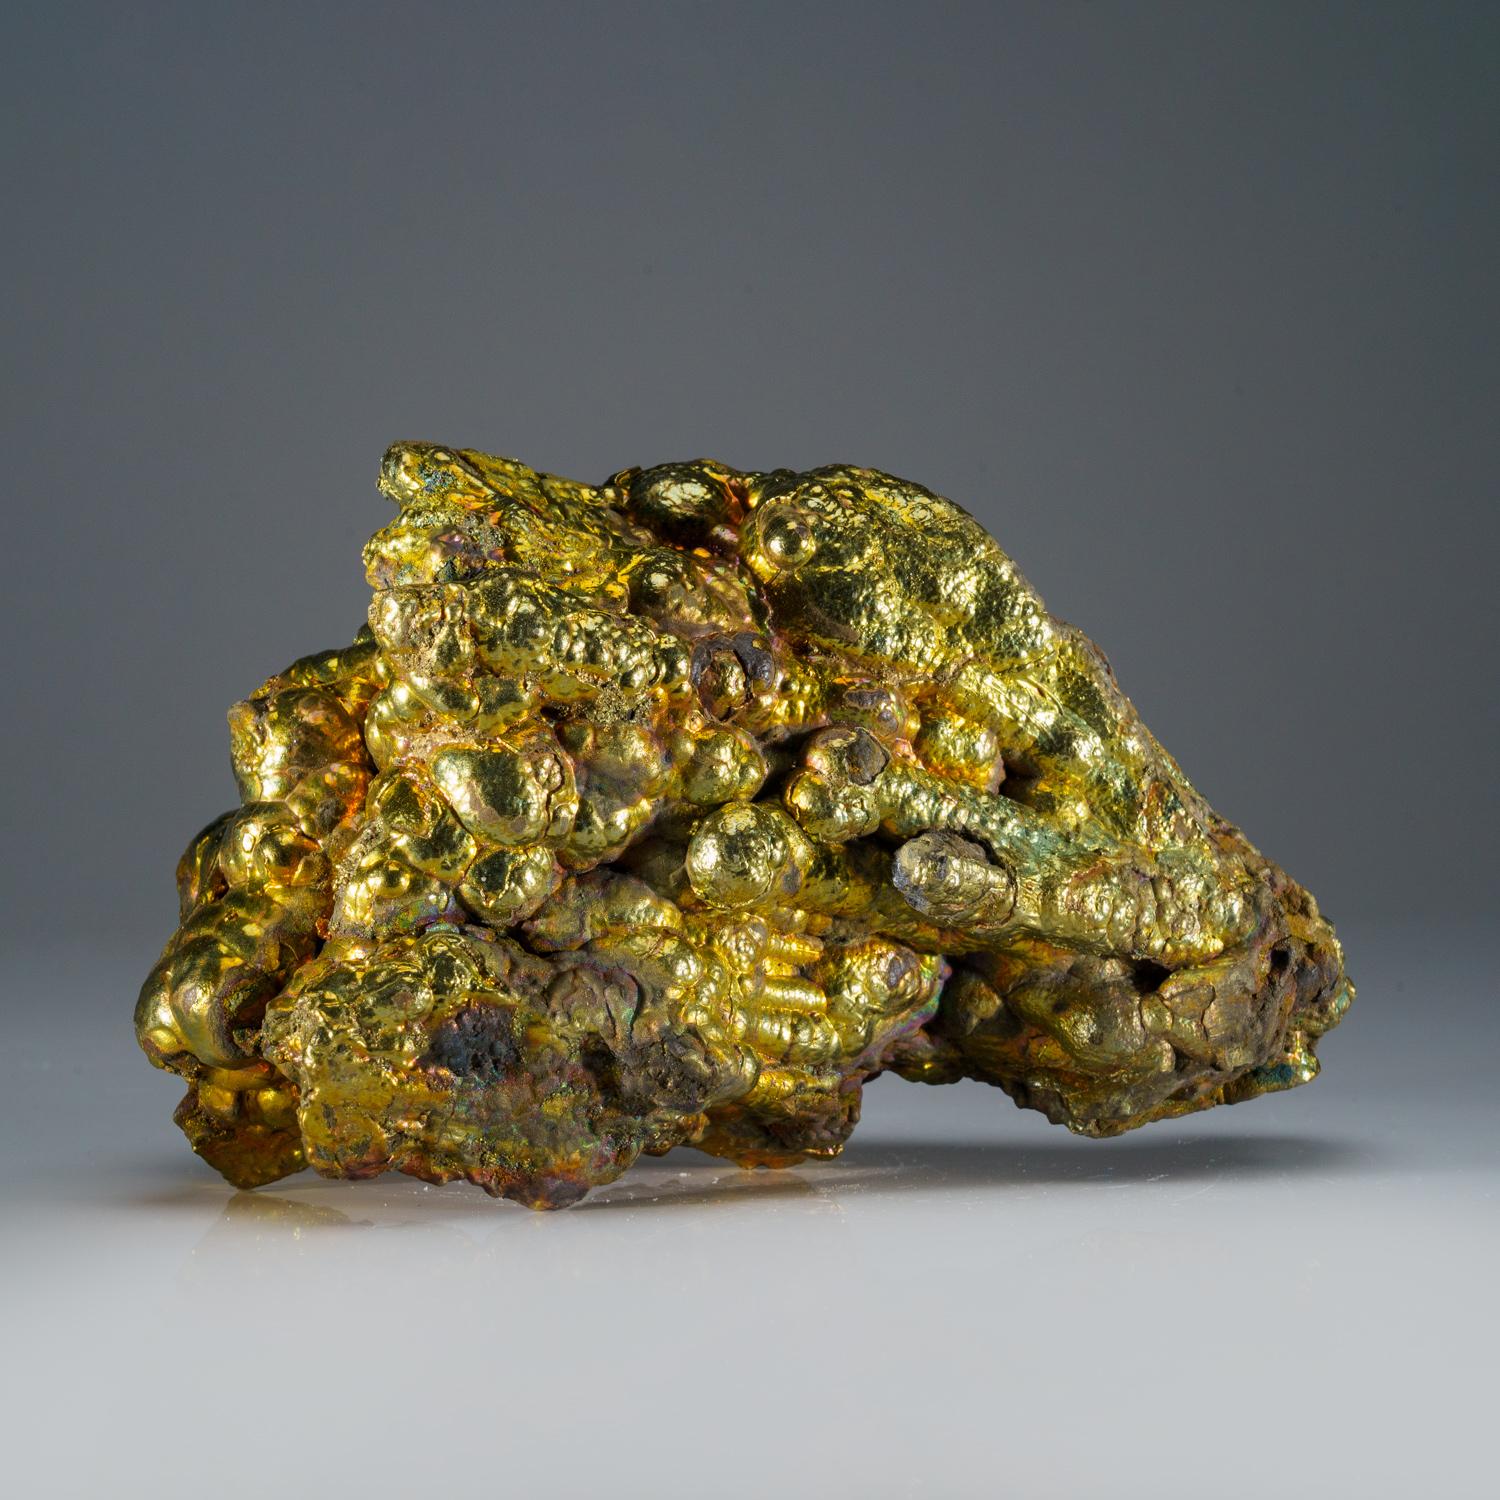 From Wulashan Au deposit, Wulashan mining district, Binhe New District, Baotou City (Baotou Prefecture), Inner Mongolia, China.

Beautiful specimen of botryoidal goethite with colorful iridescent surfaces grading from yellow, to green to